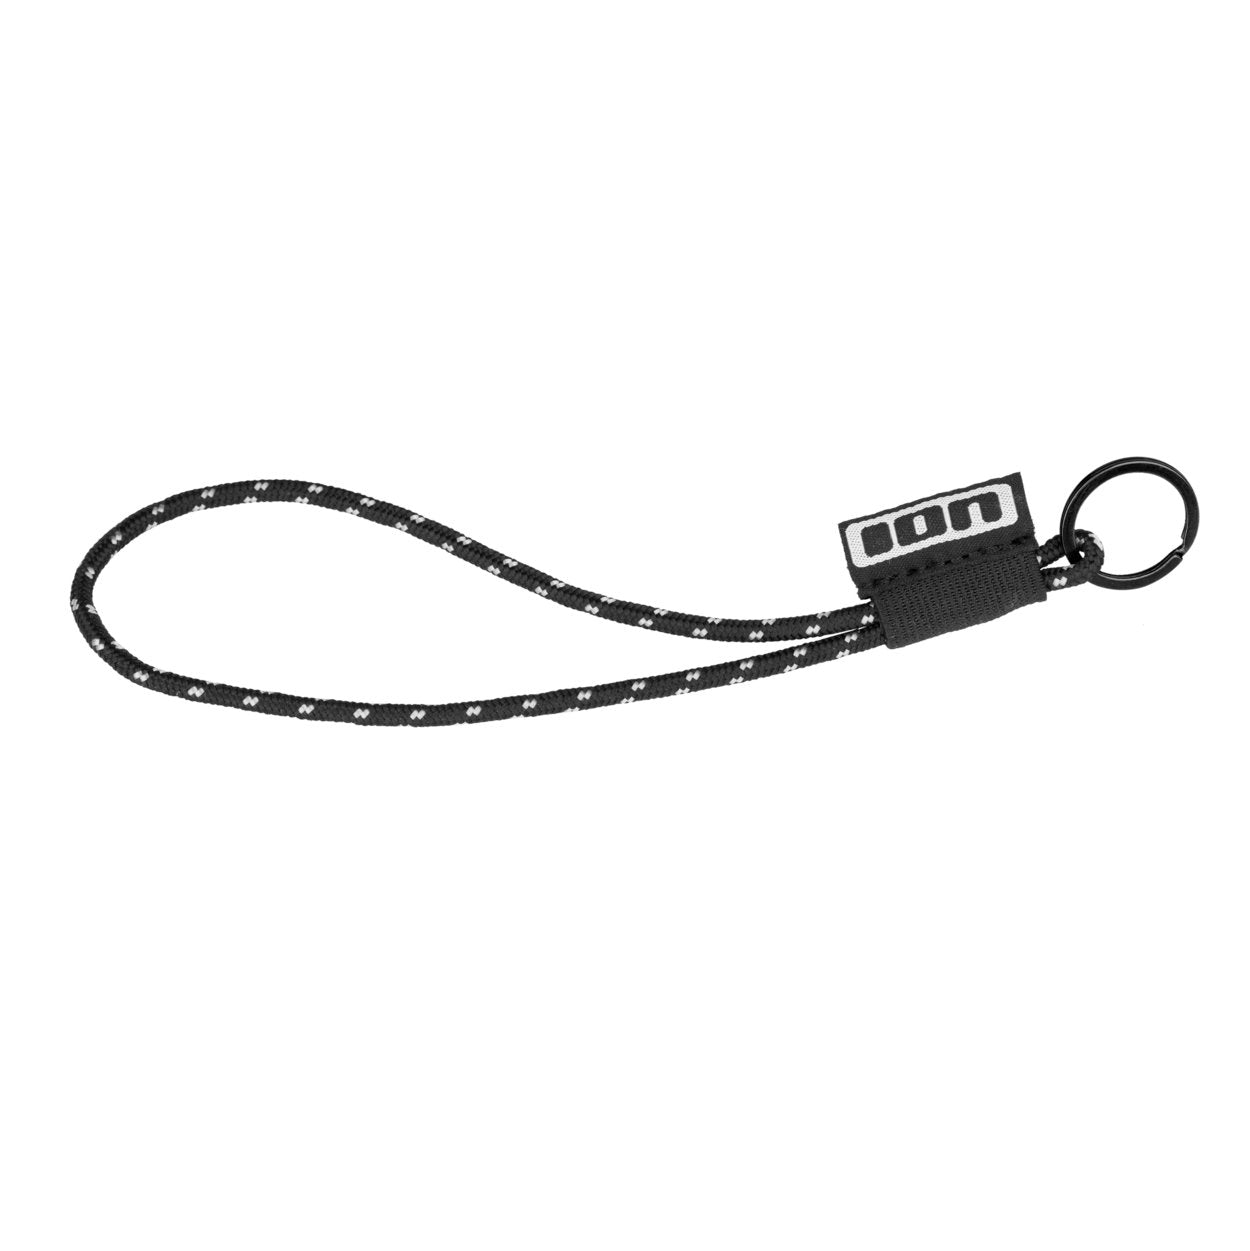 ION Lanyard 2024 - Worthing Watersports - 9008415565726 - Promotion - ION Water